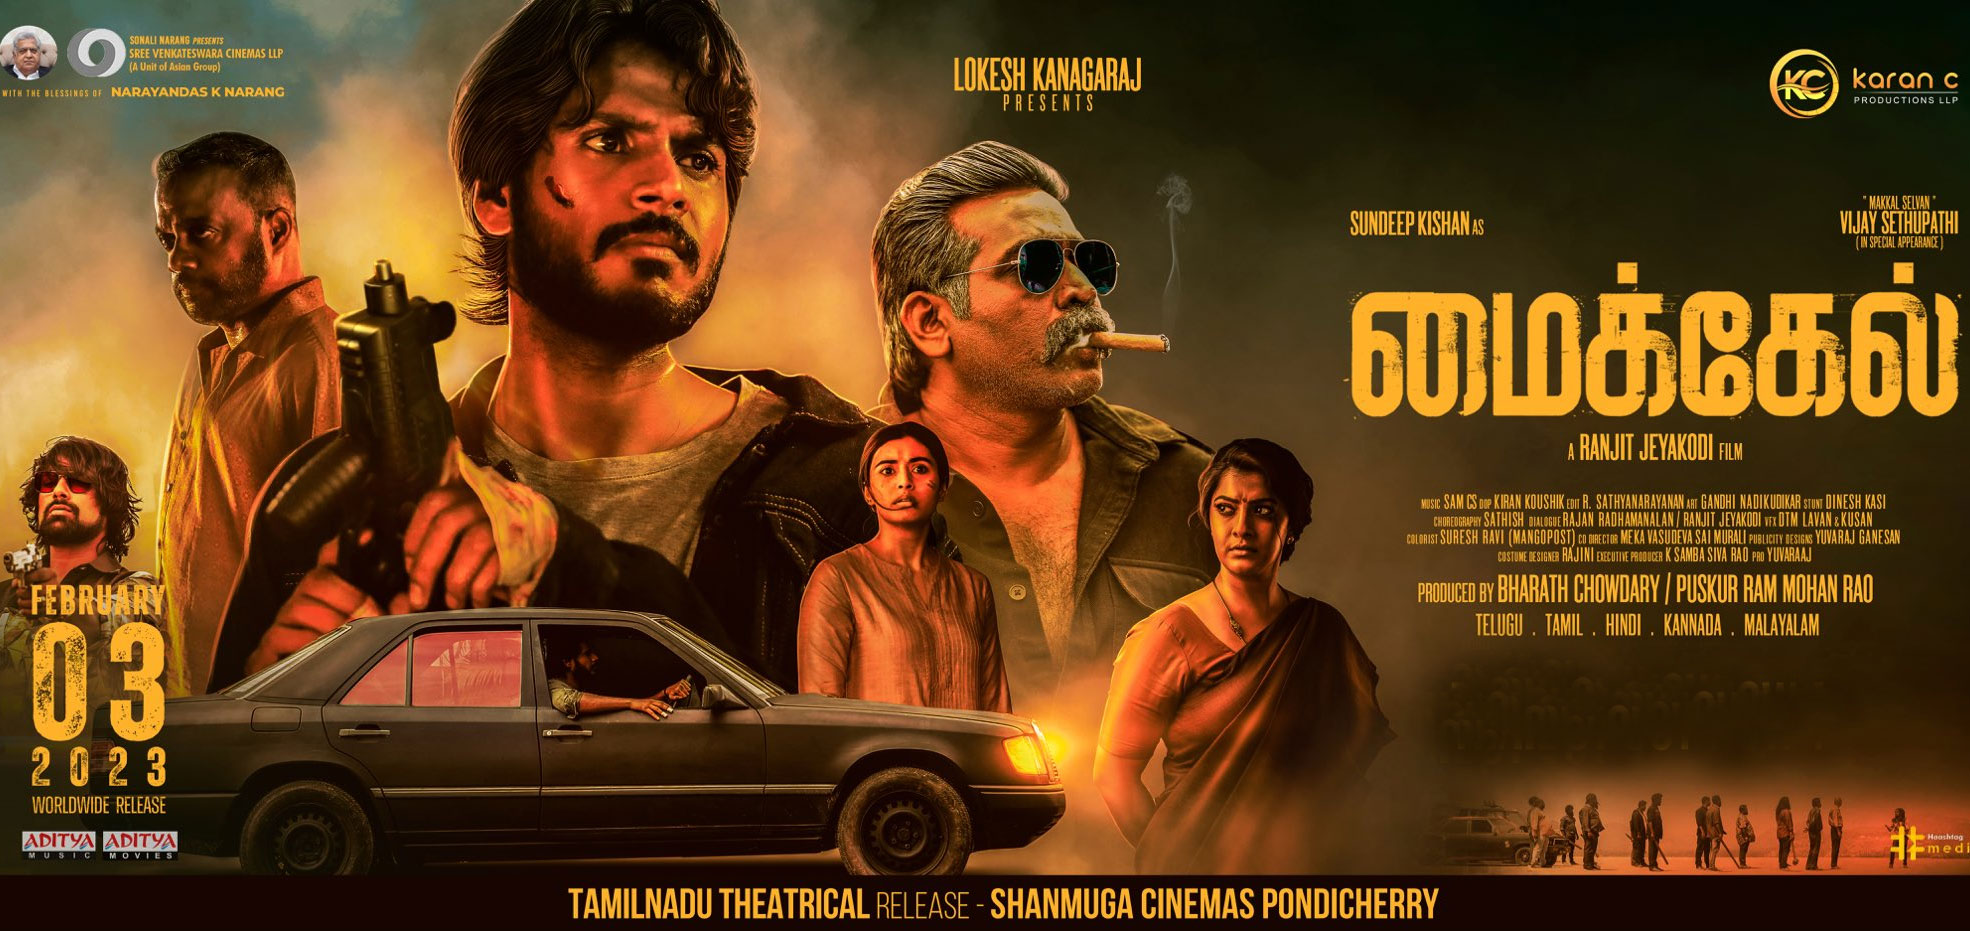 michael tamil movie review 2023